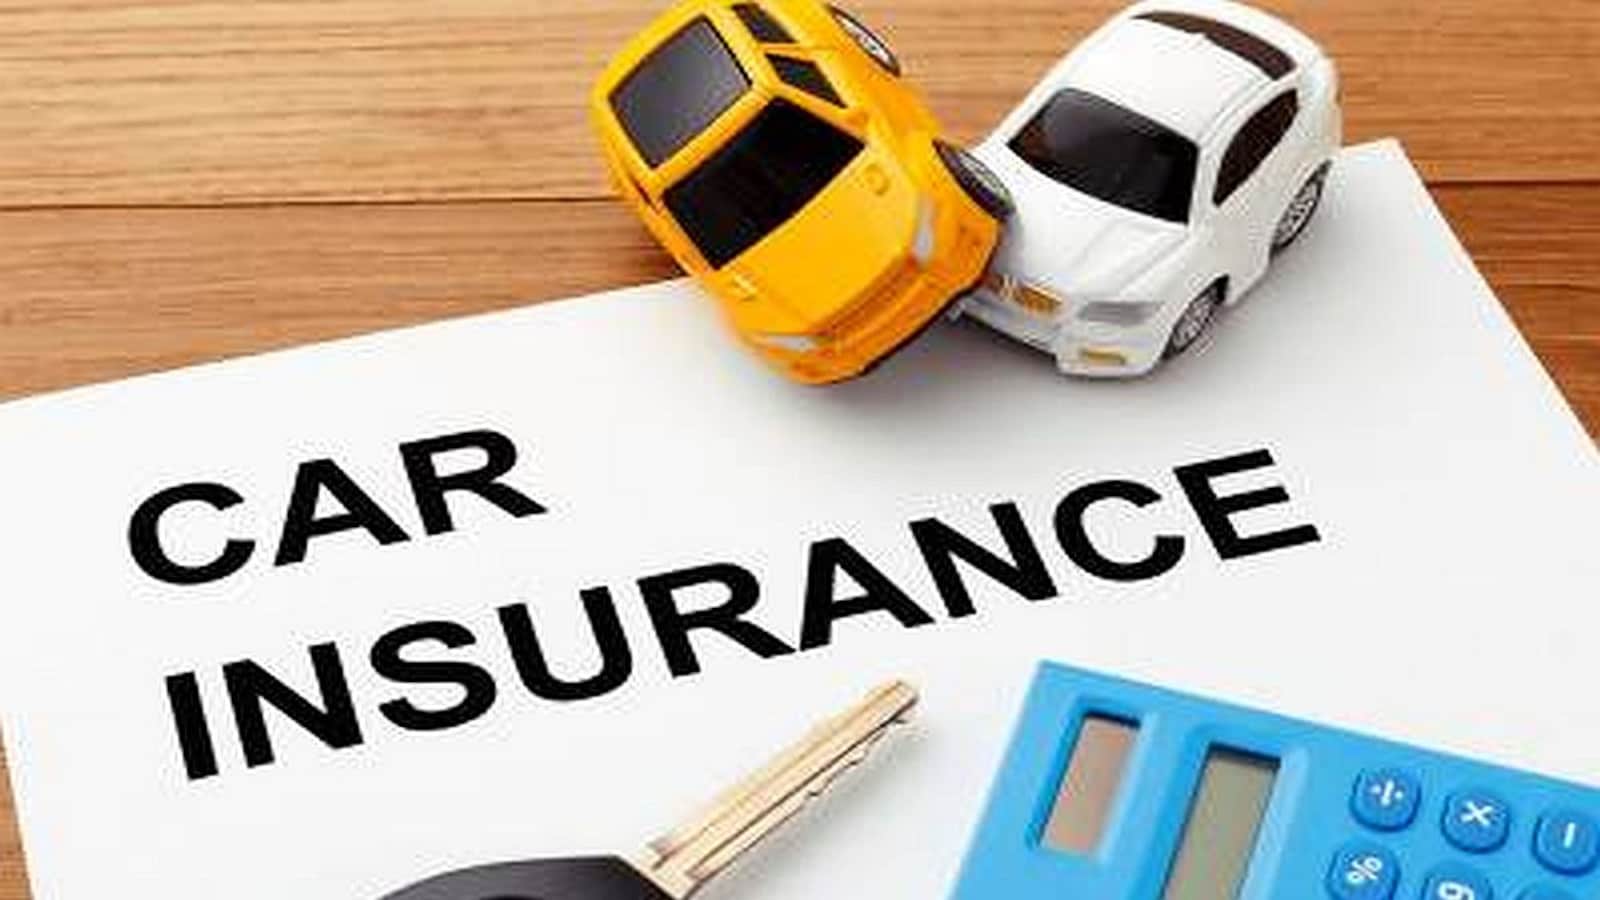 A complete guide on car insurance policy online